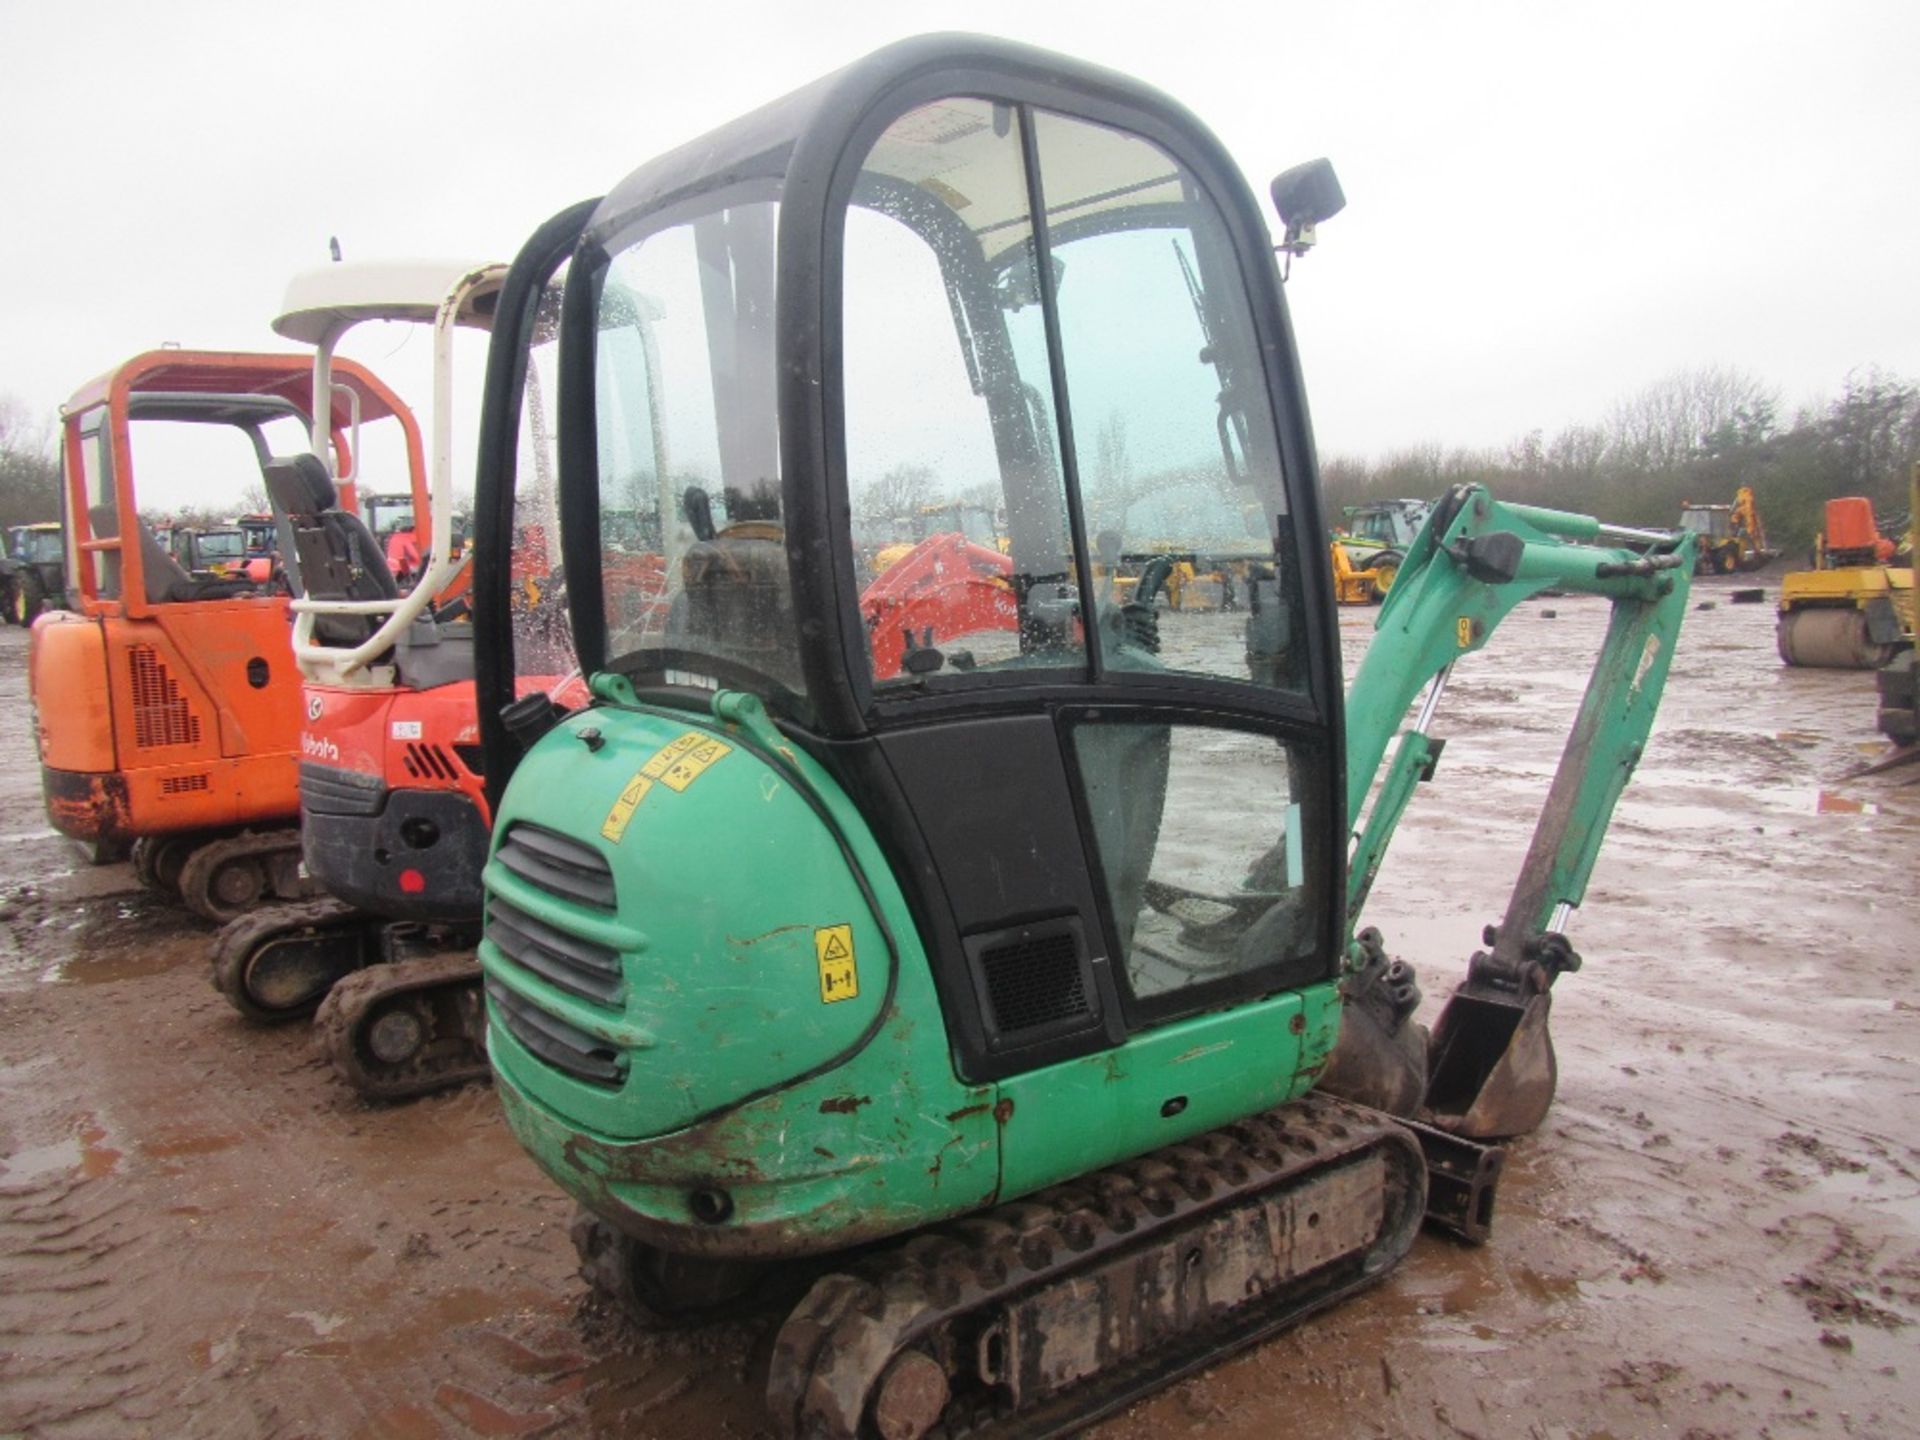 2007 JCB 801.5 Mini Digger c/w Full Cab, Rubber Tracks, 2no. Buckets 2212 Hrs - Image 3 of 6